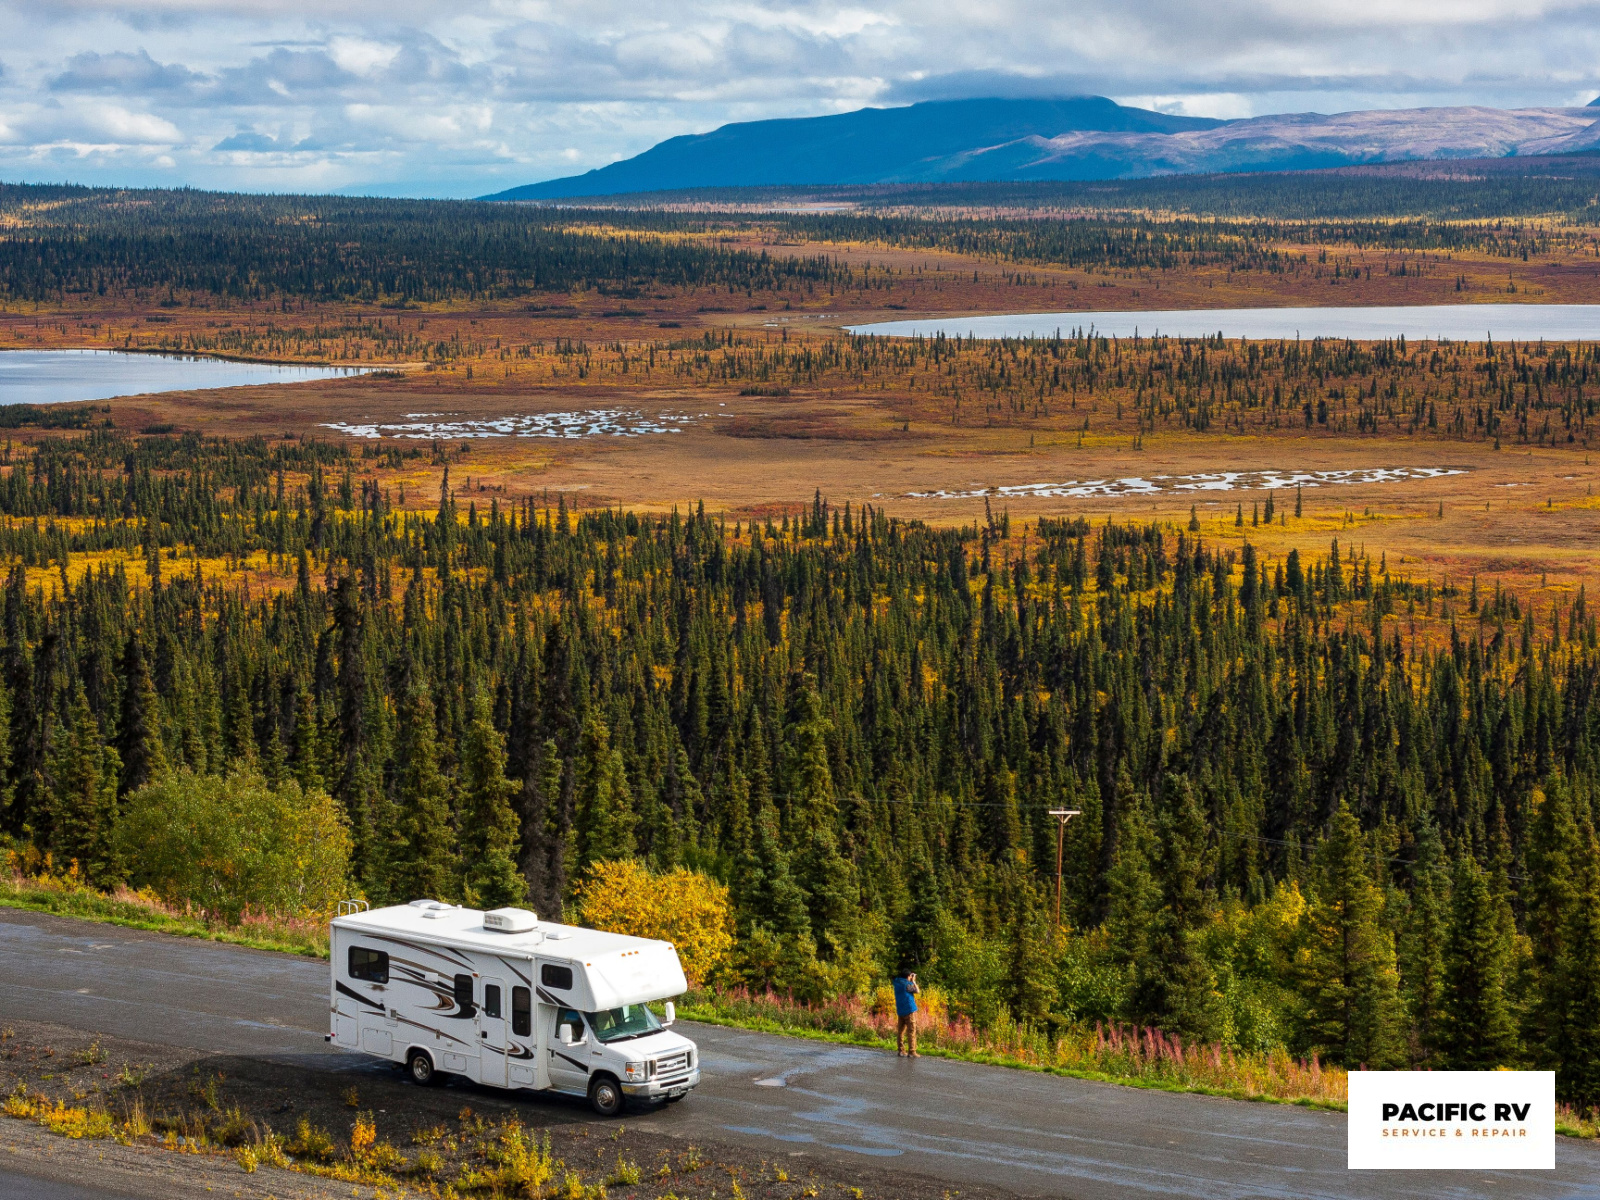 Need RV Window Repair In North Bend? Look No Further Than Pacific RV!